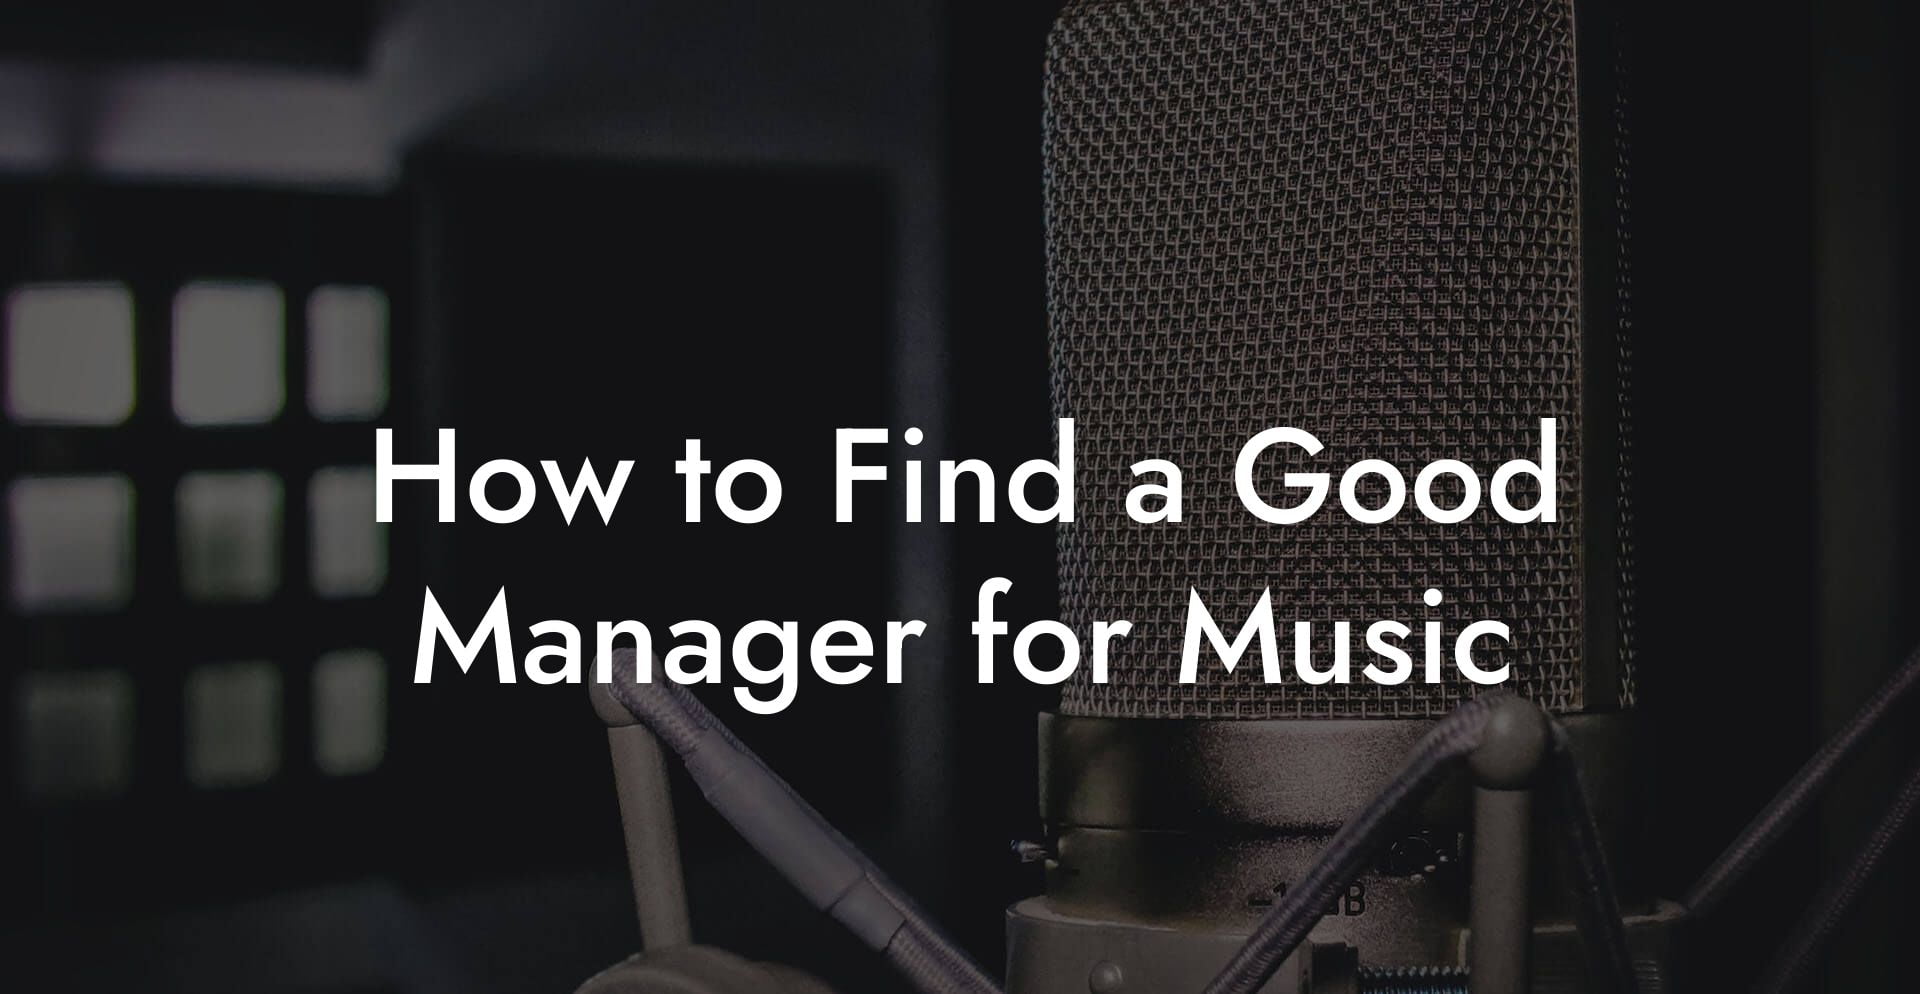 How to Find a Good Manager for Music